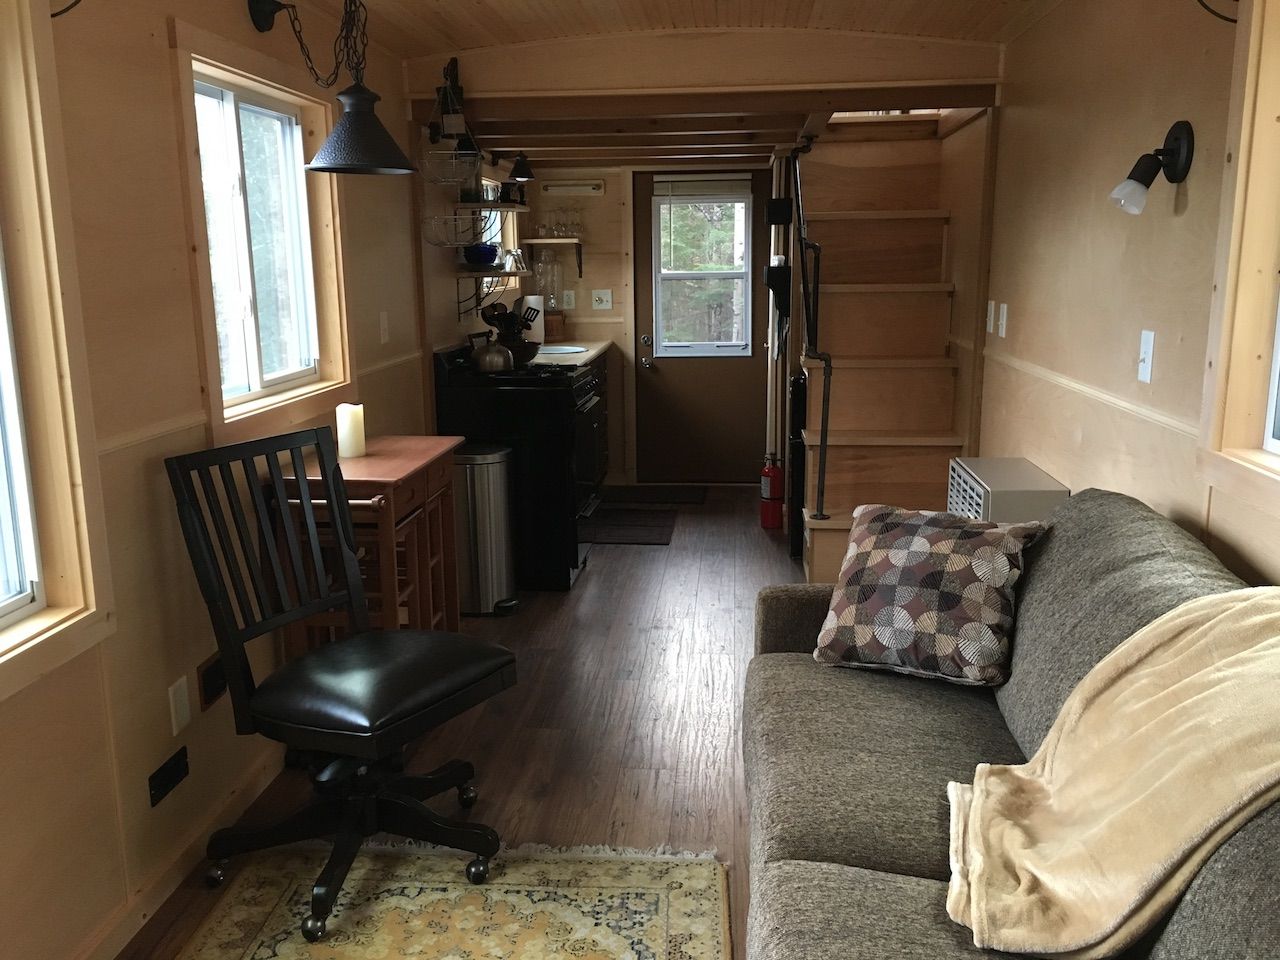 Inside a cabin converted from a train in the forest